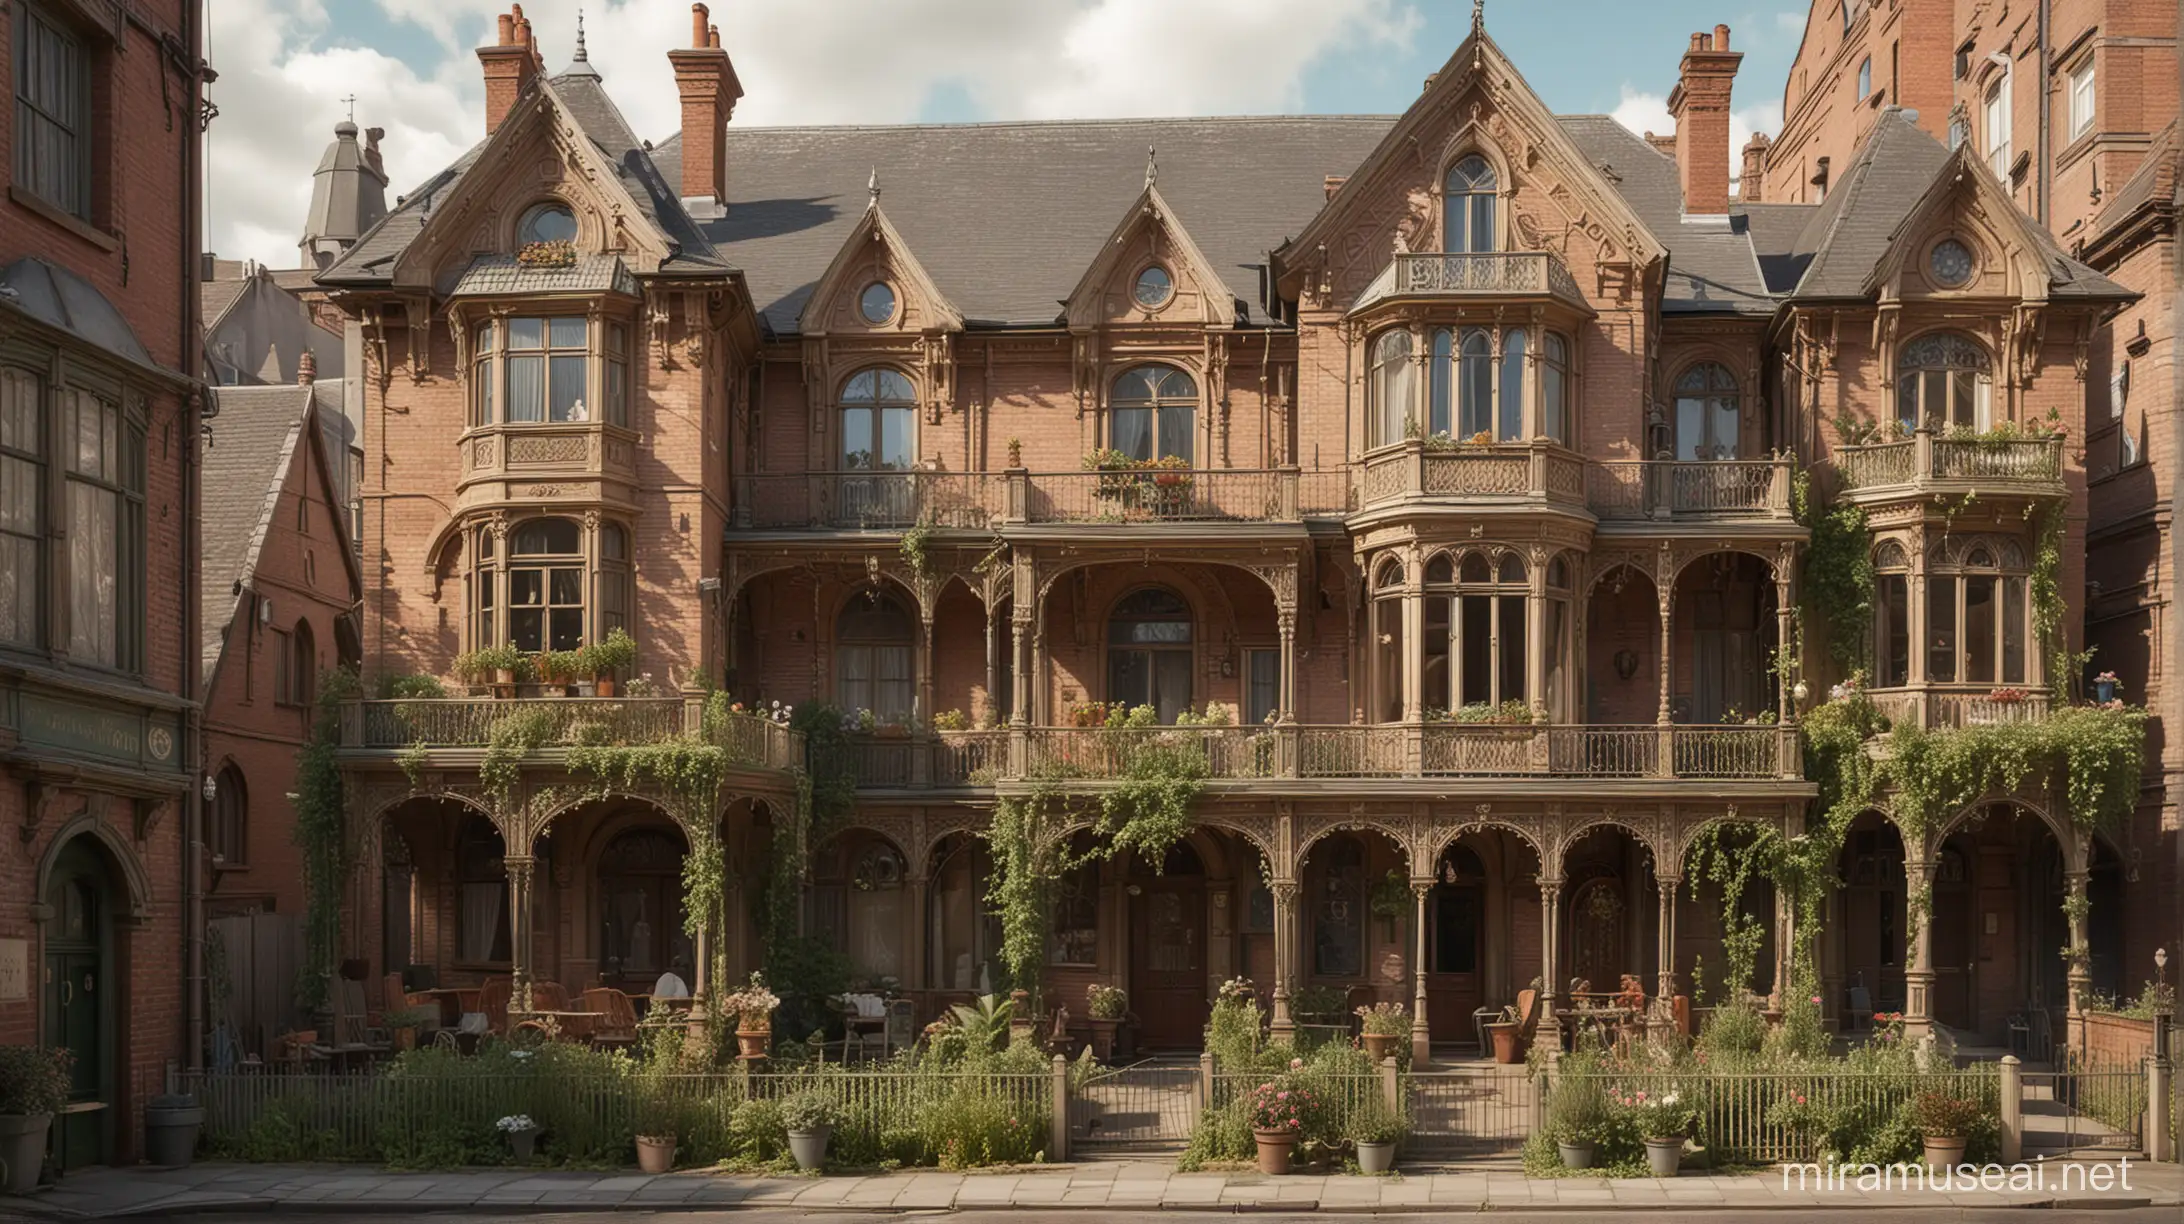 Large victorian style fantasy brothel seen from the street. The building is set apart from other buildings by a small garden. 6 elven prostitutes are standing in a group on the street in front of the building and on the balcony.